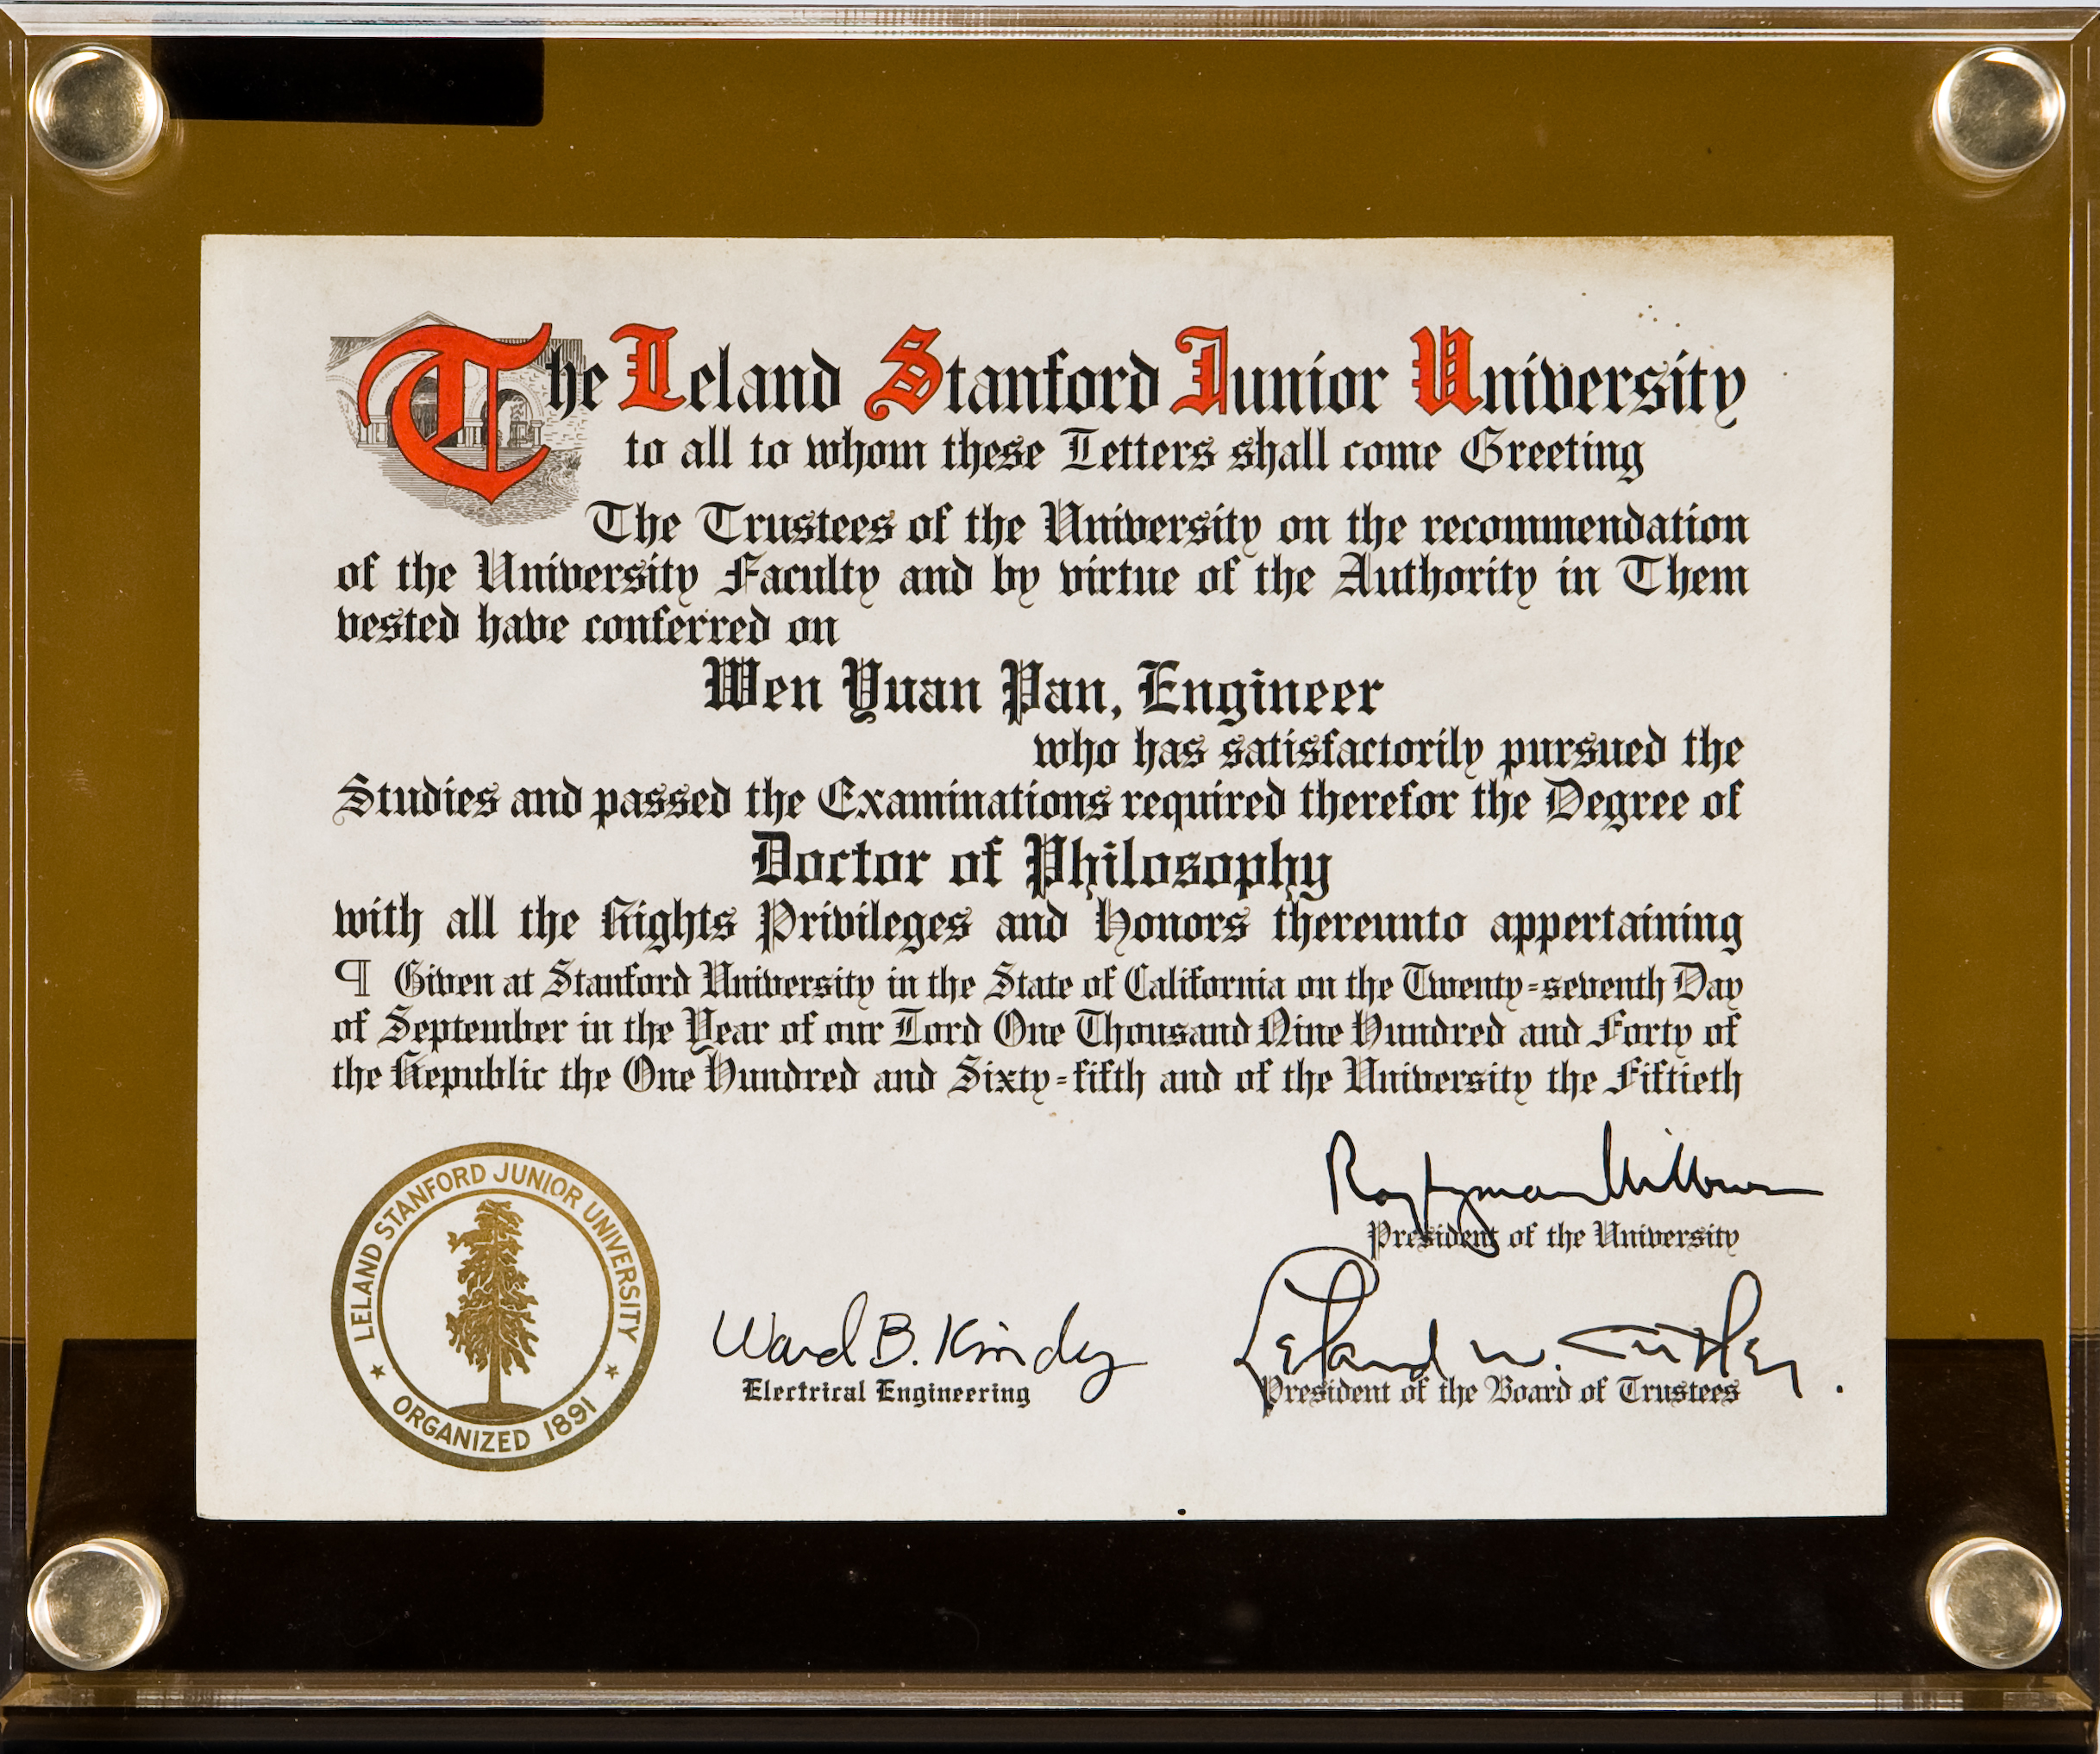 Doctoral degree certficate from Stanford Univeristy.